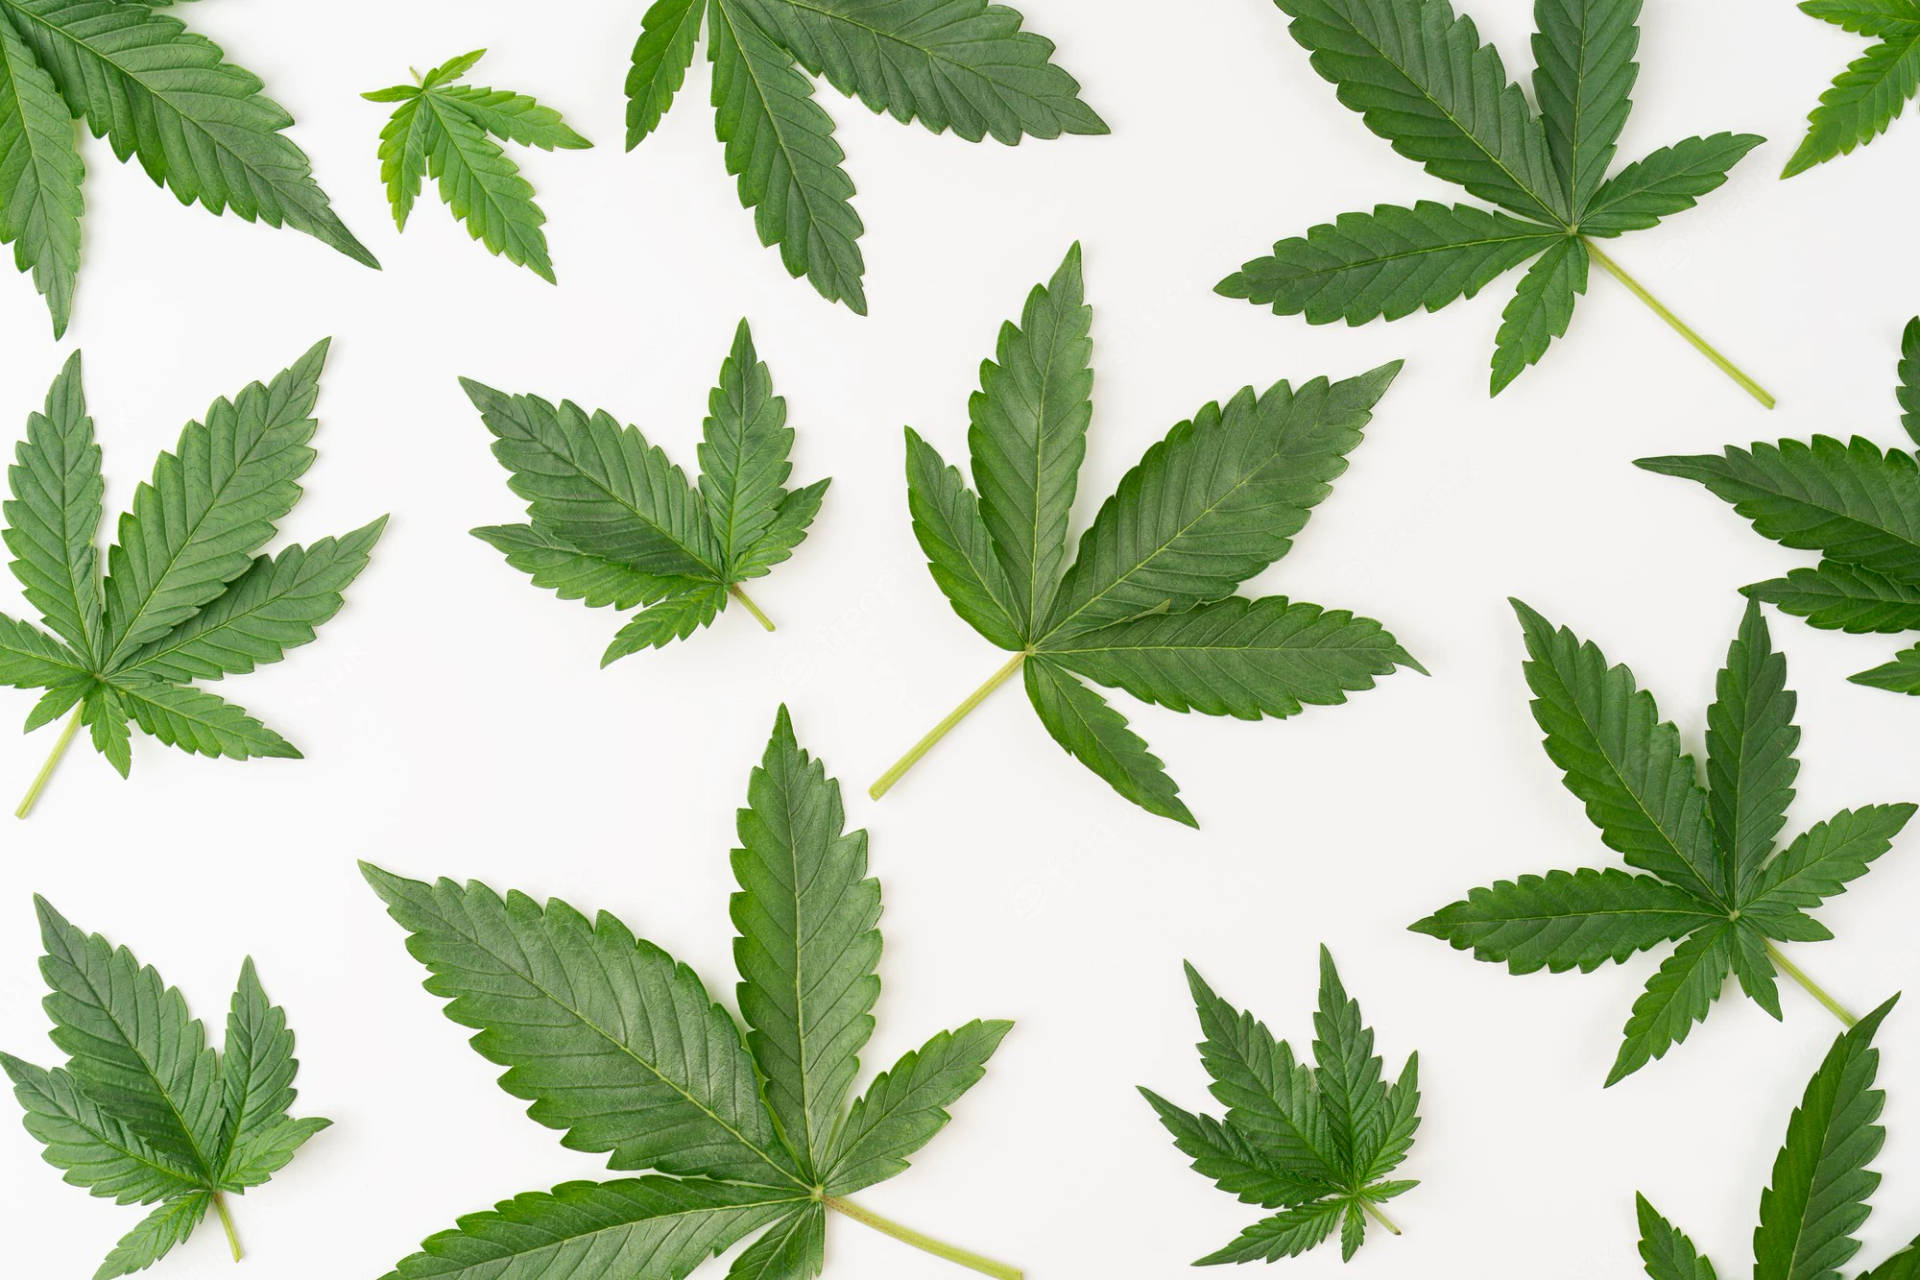 Cool Weed Leaves Flat-lay Background